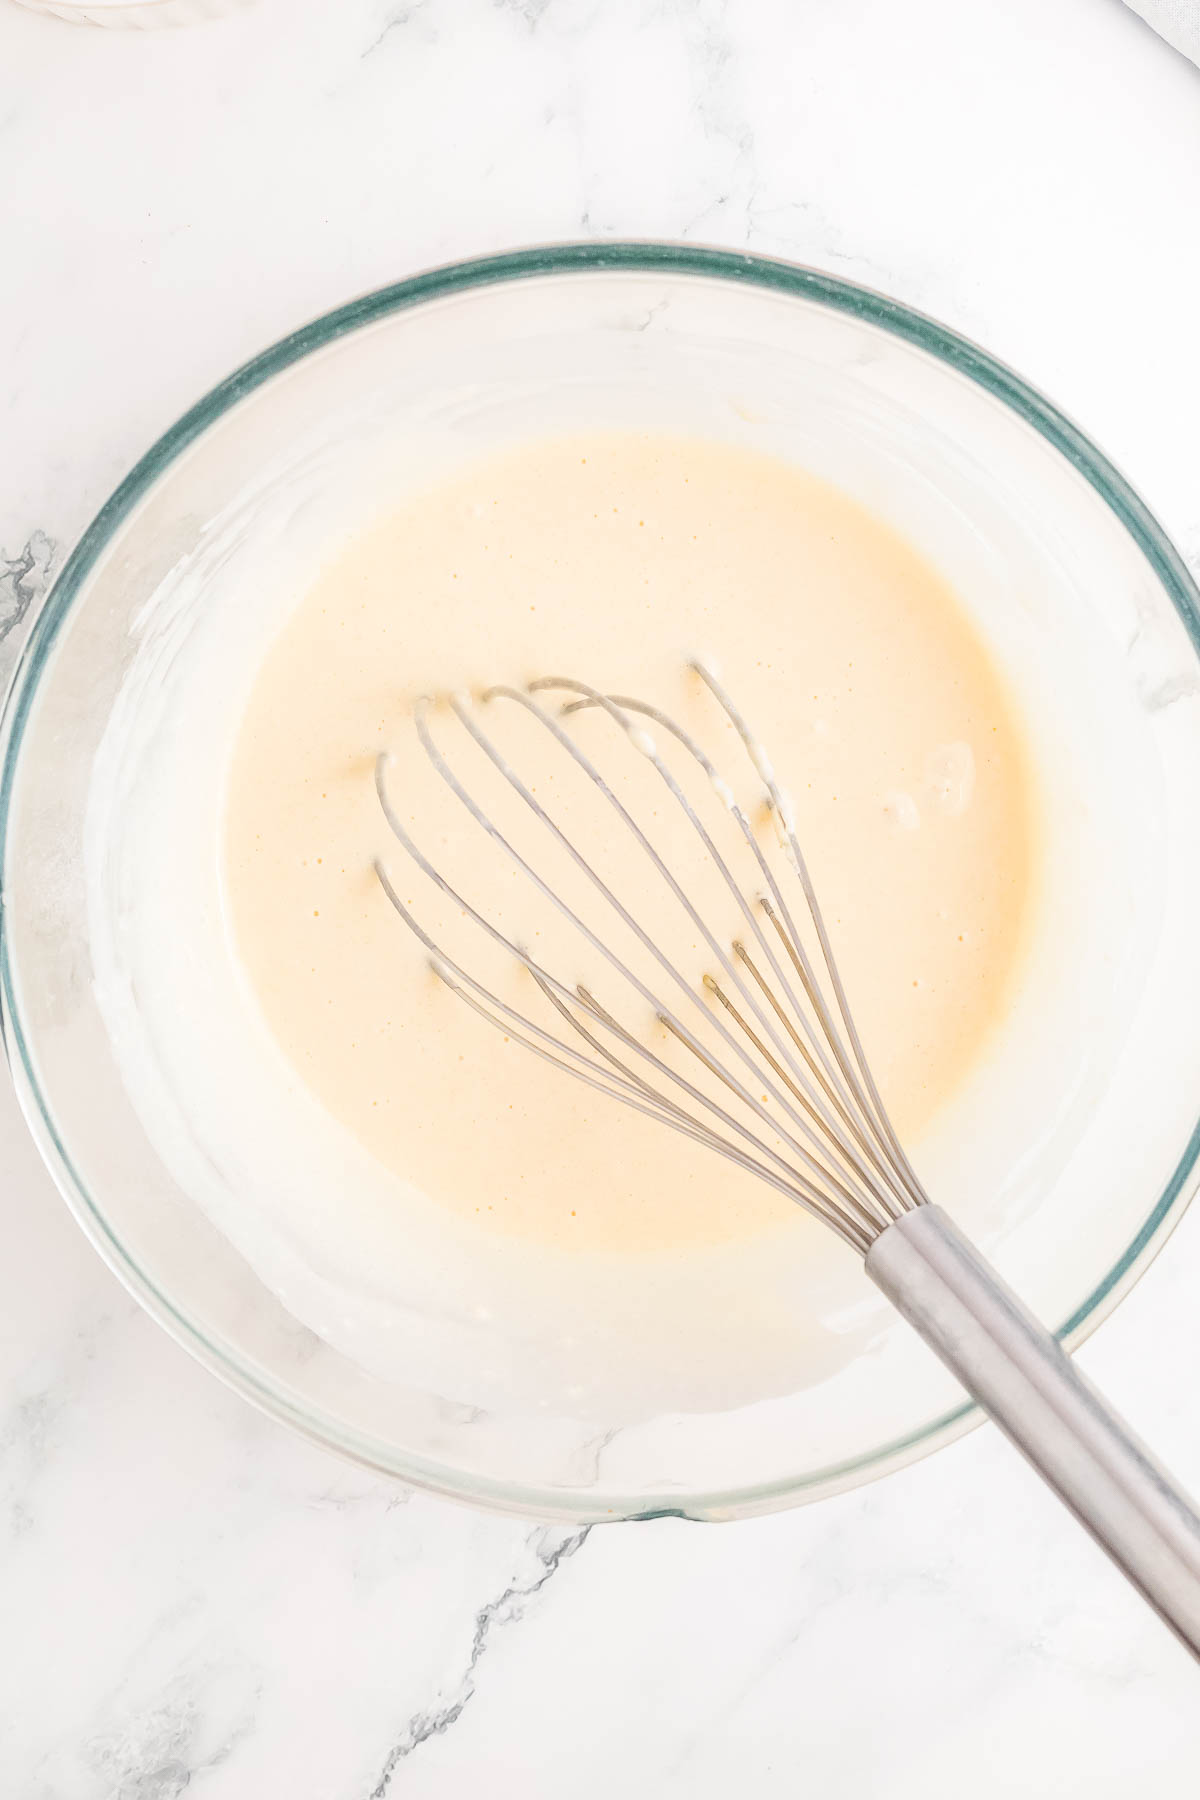 A clear glass bowl containing a light beige batter with a metal whisk, sitting on a marble surface.